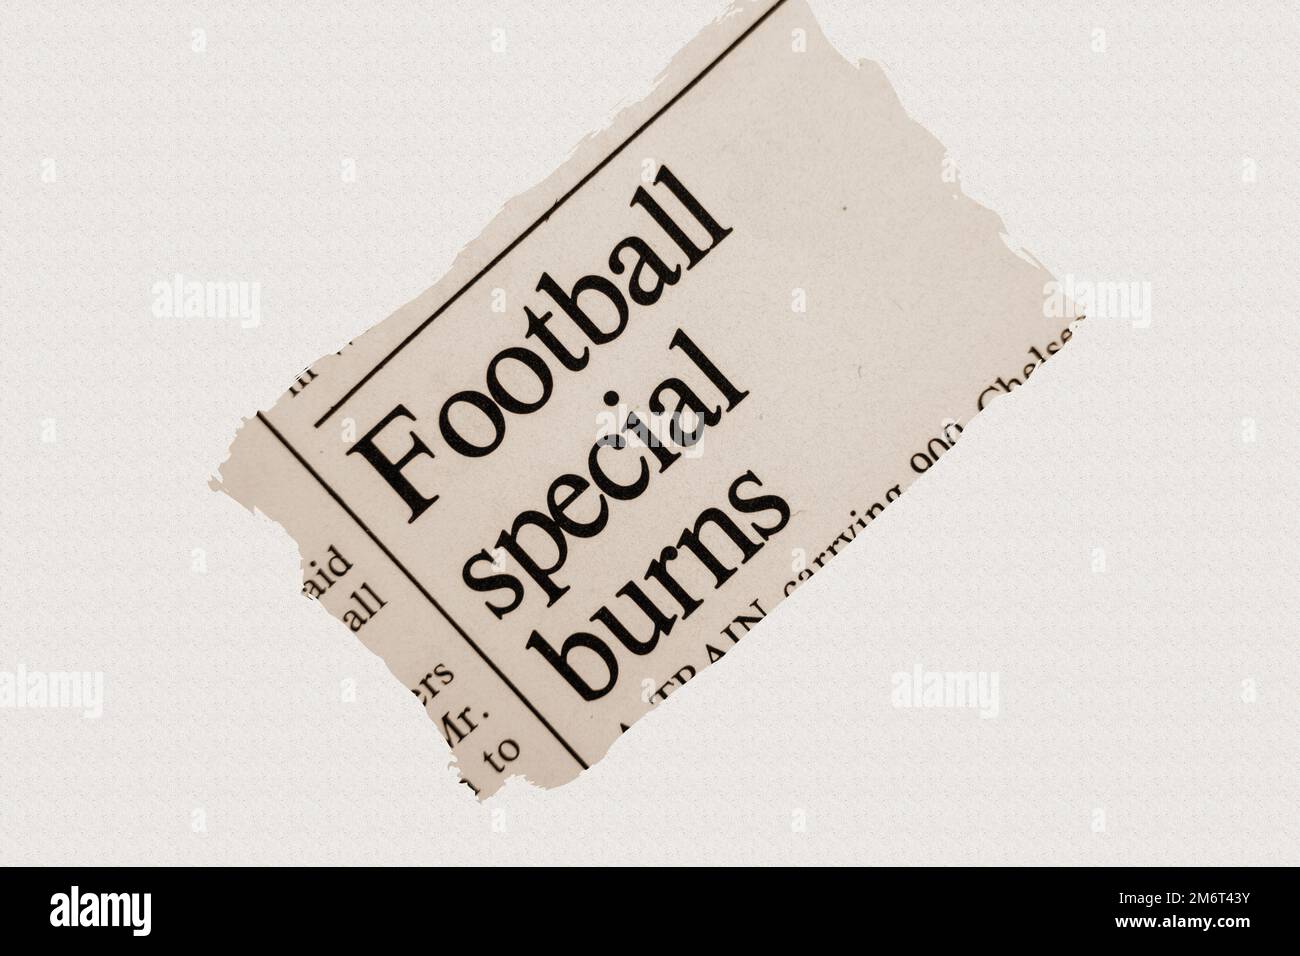 news story from 1975 newspaper headline article title - Football special burns in sepia Stock Photo